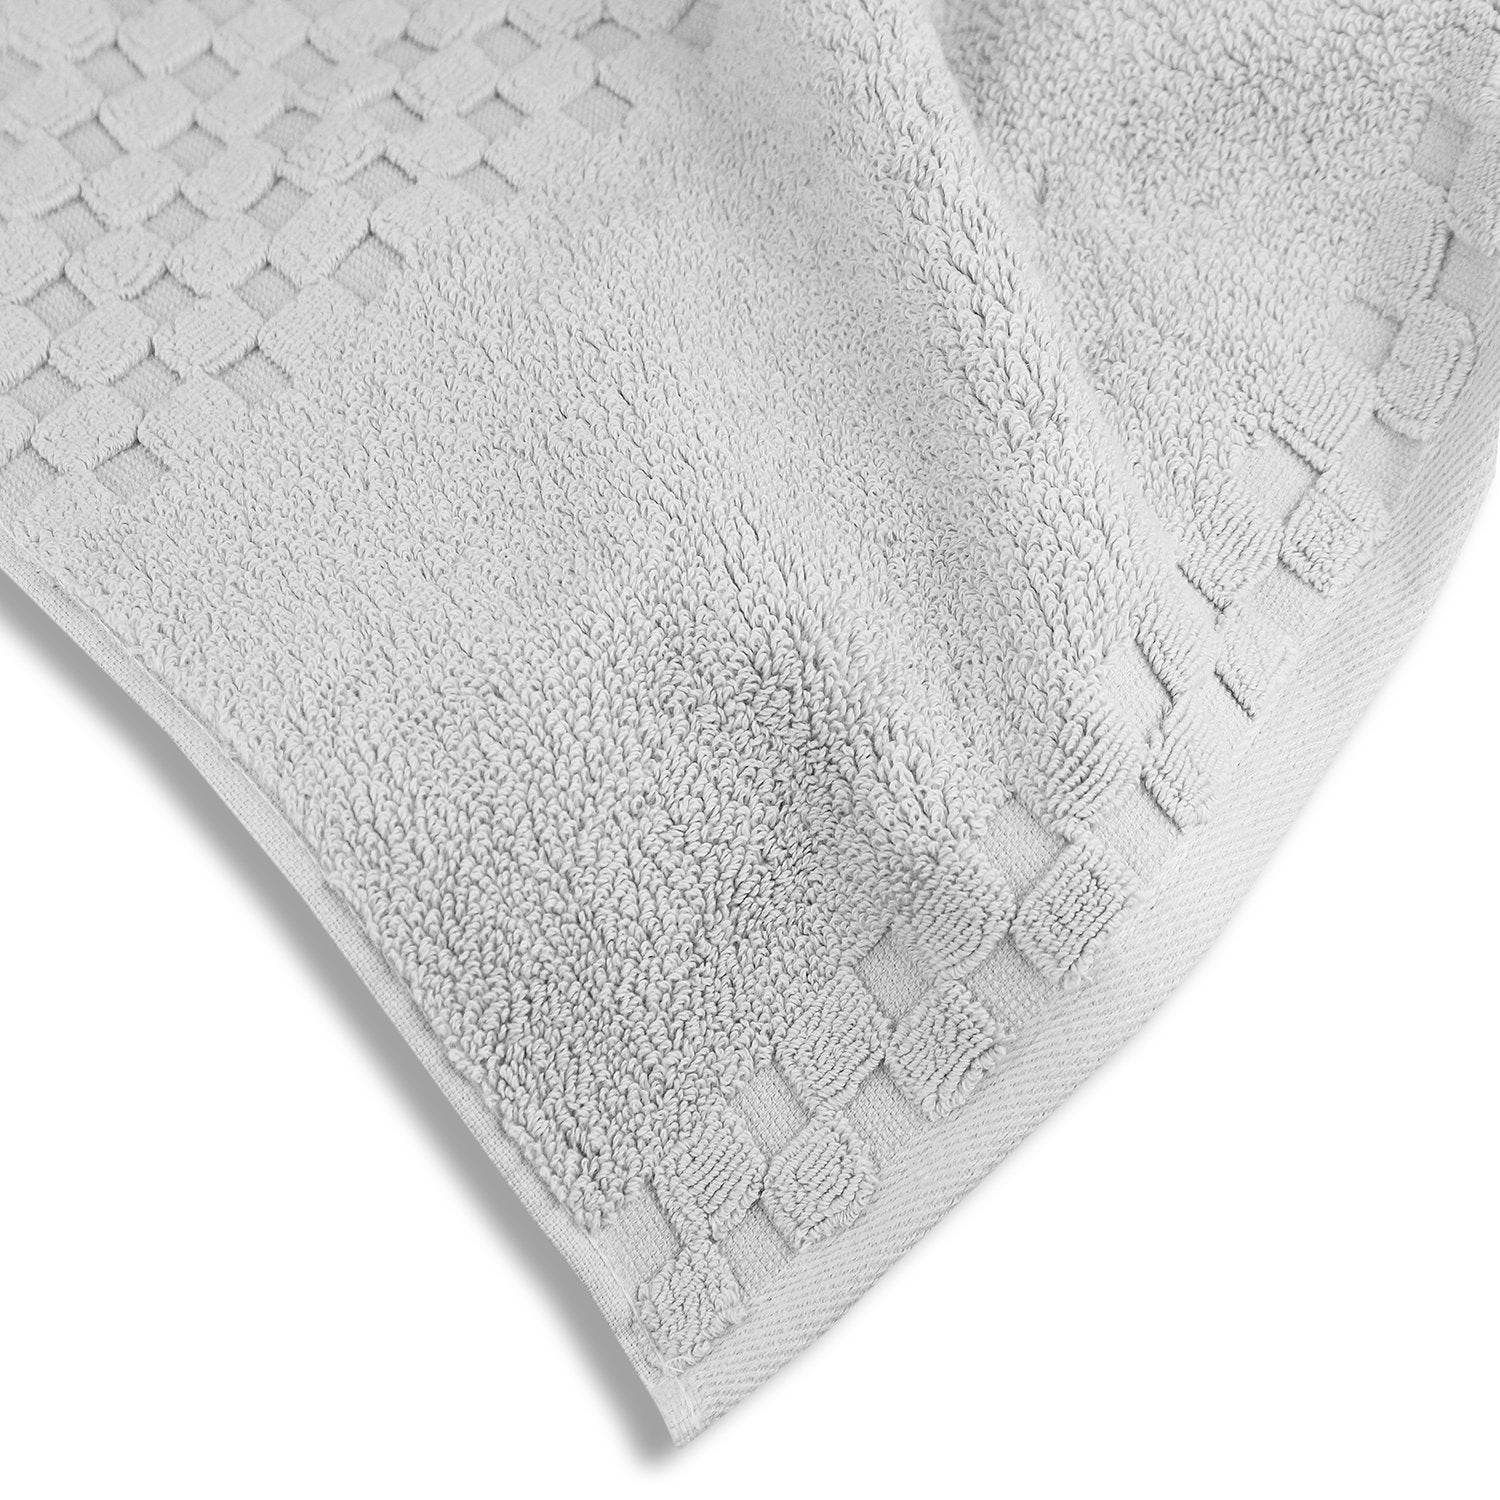 Limited Edition Valentino Hotel Collection Egyptian Cotton Spa Towels